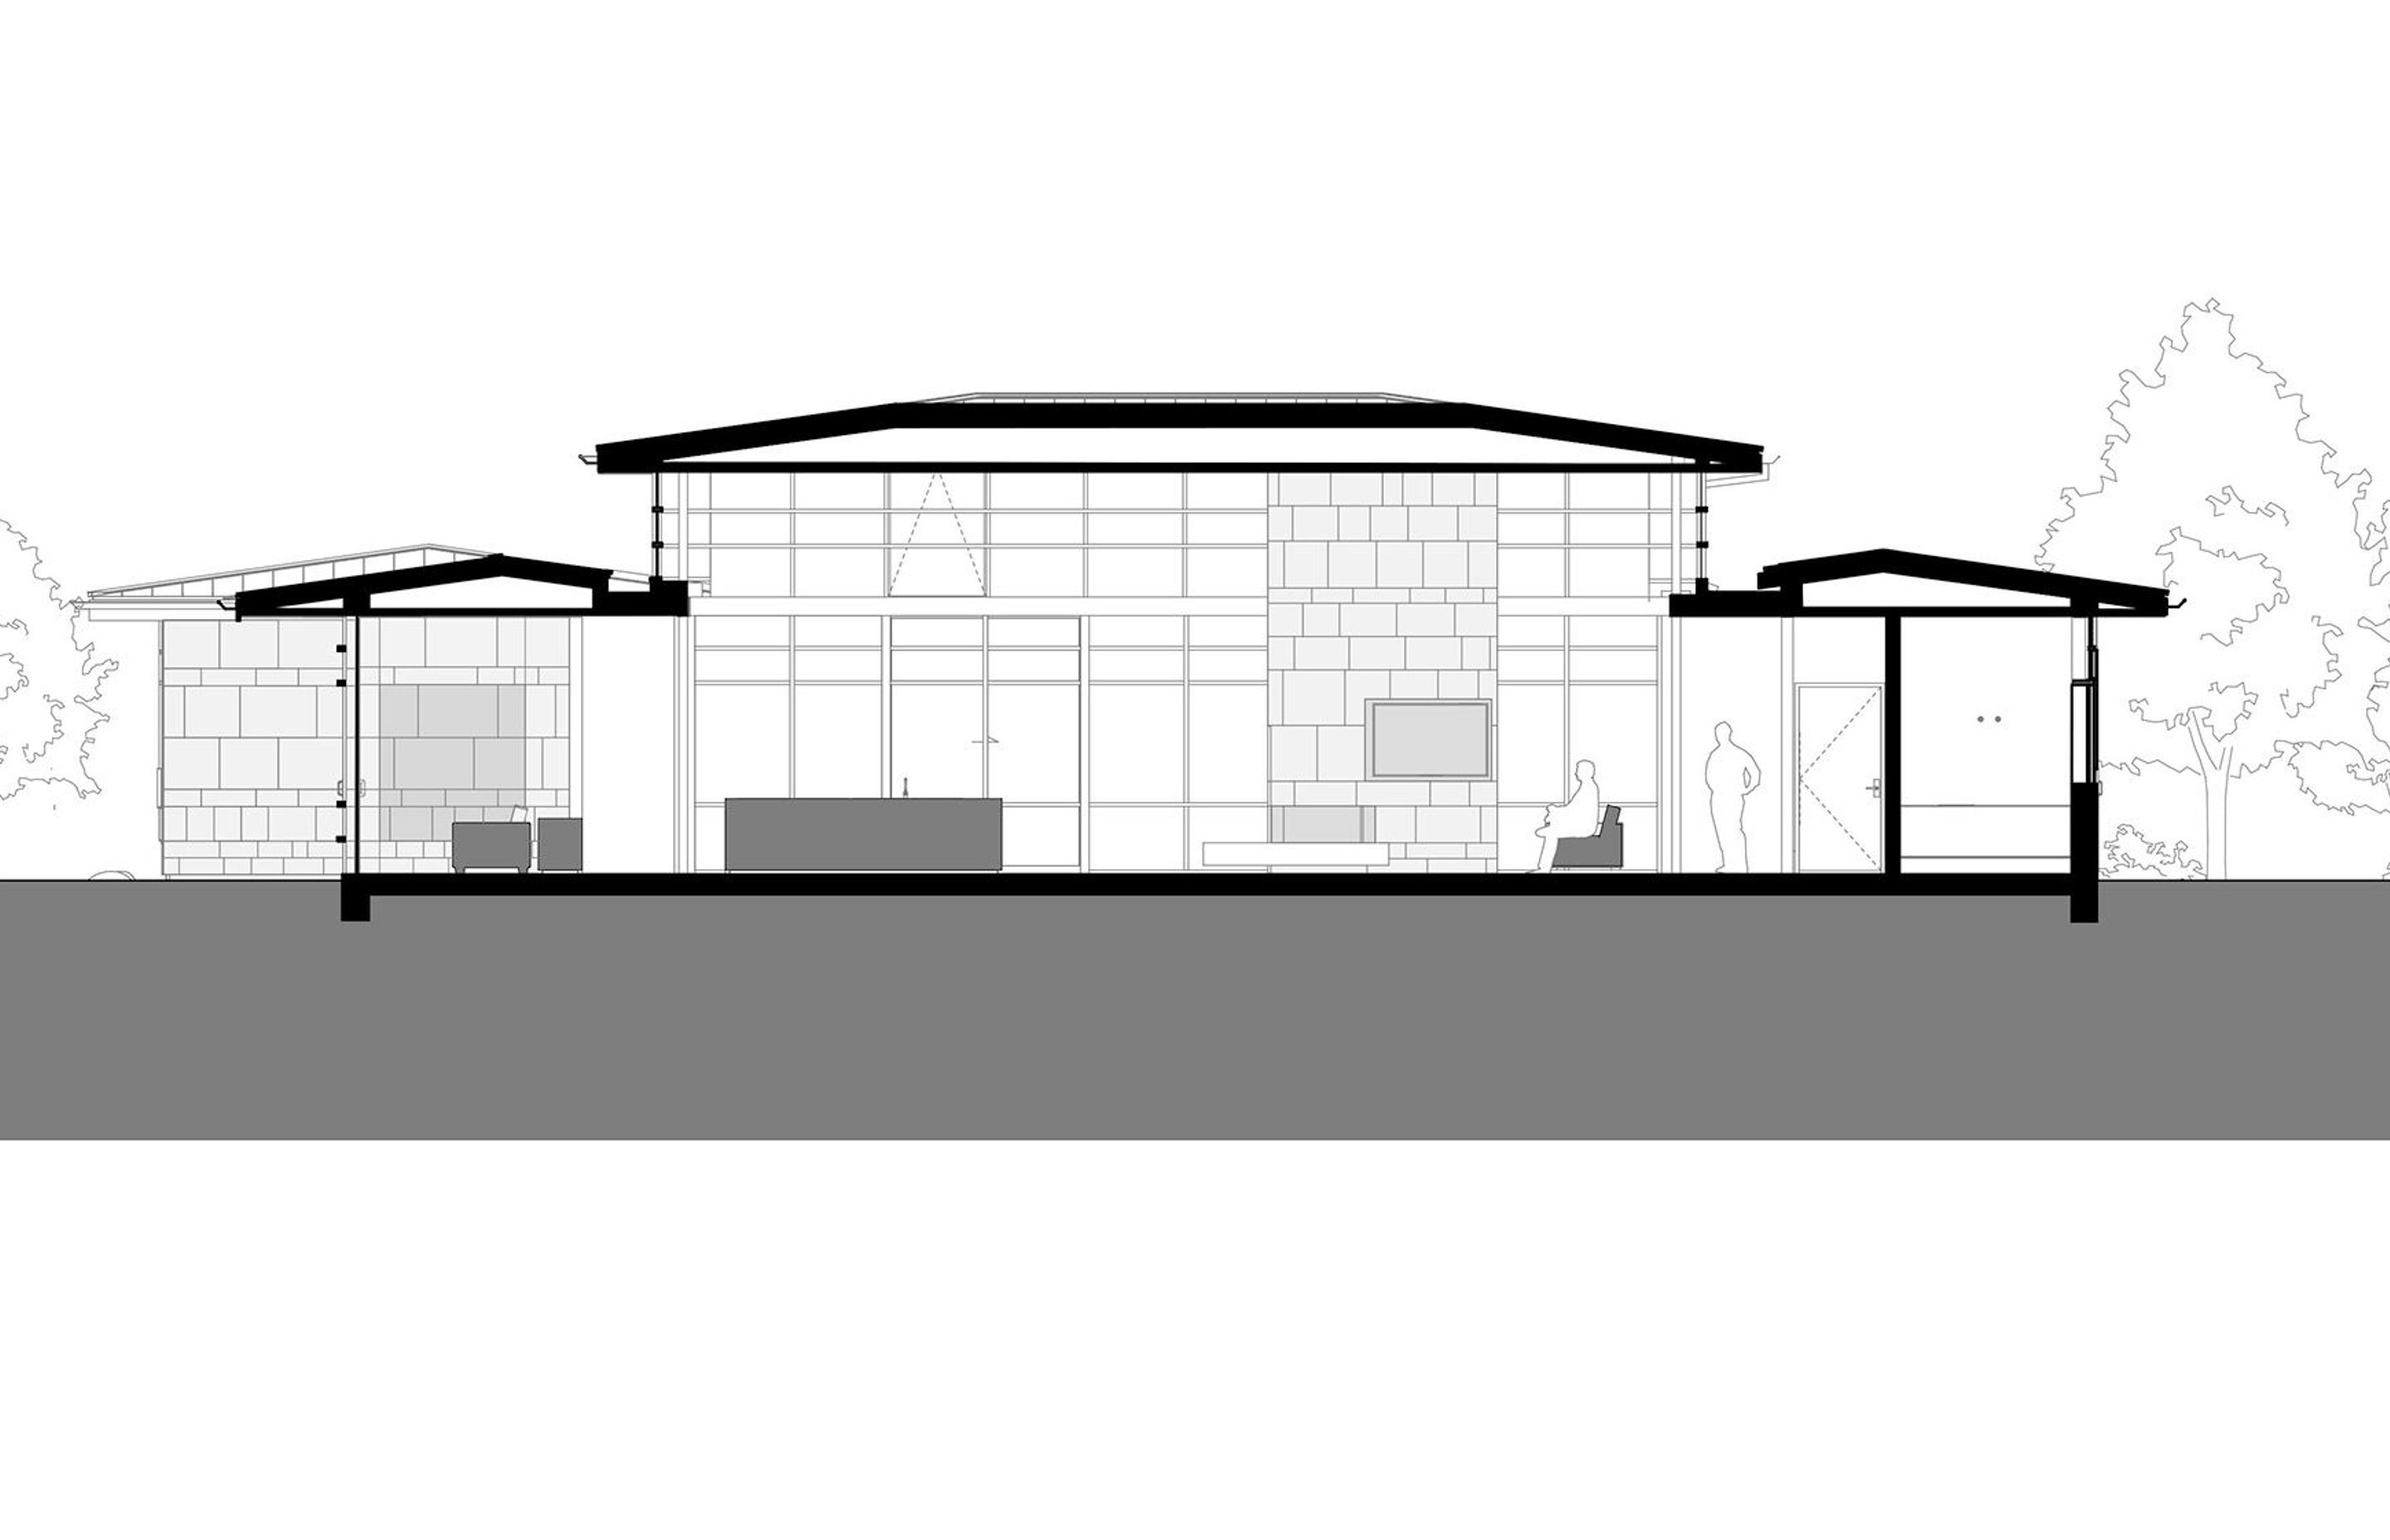 A section or slice-through of the house showing the library and kitchen to the left and the lounge and guest bedroom to the right; by RB Studio.